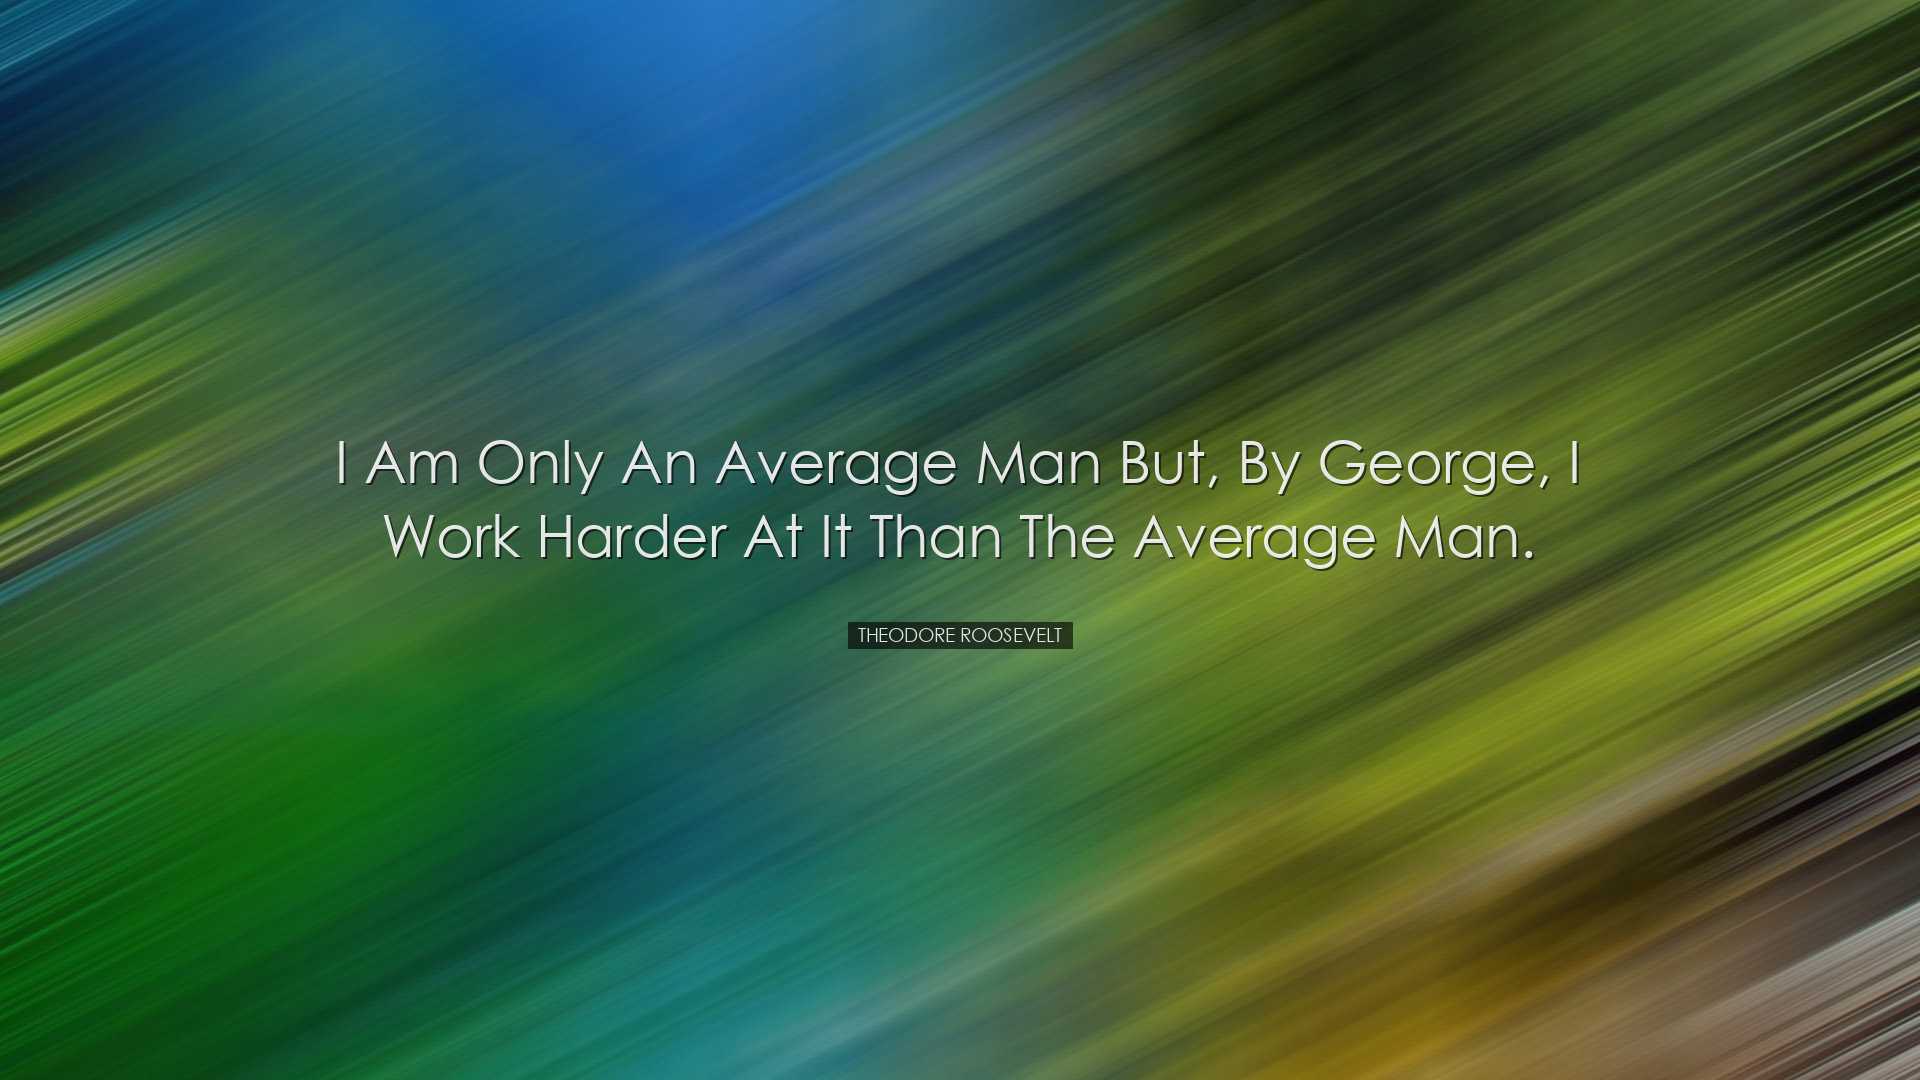 I am only an average man but, by George, I work harder at it than